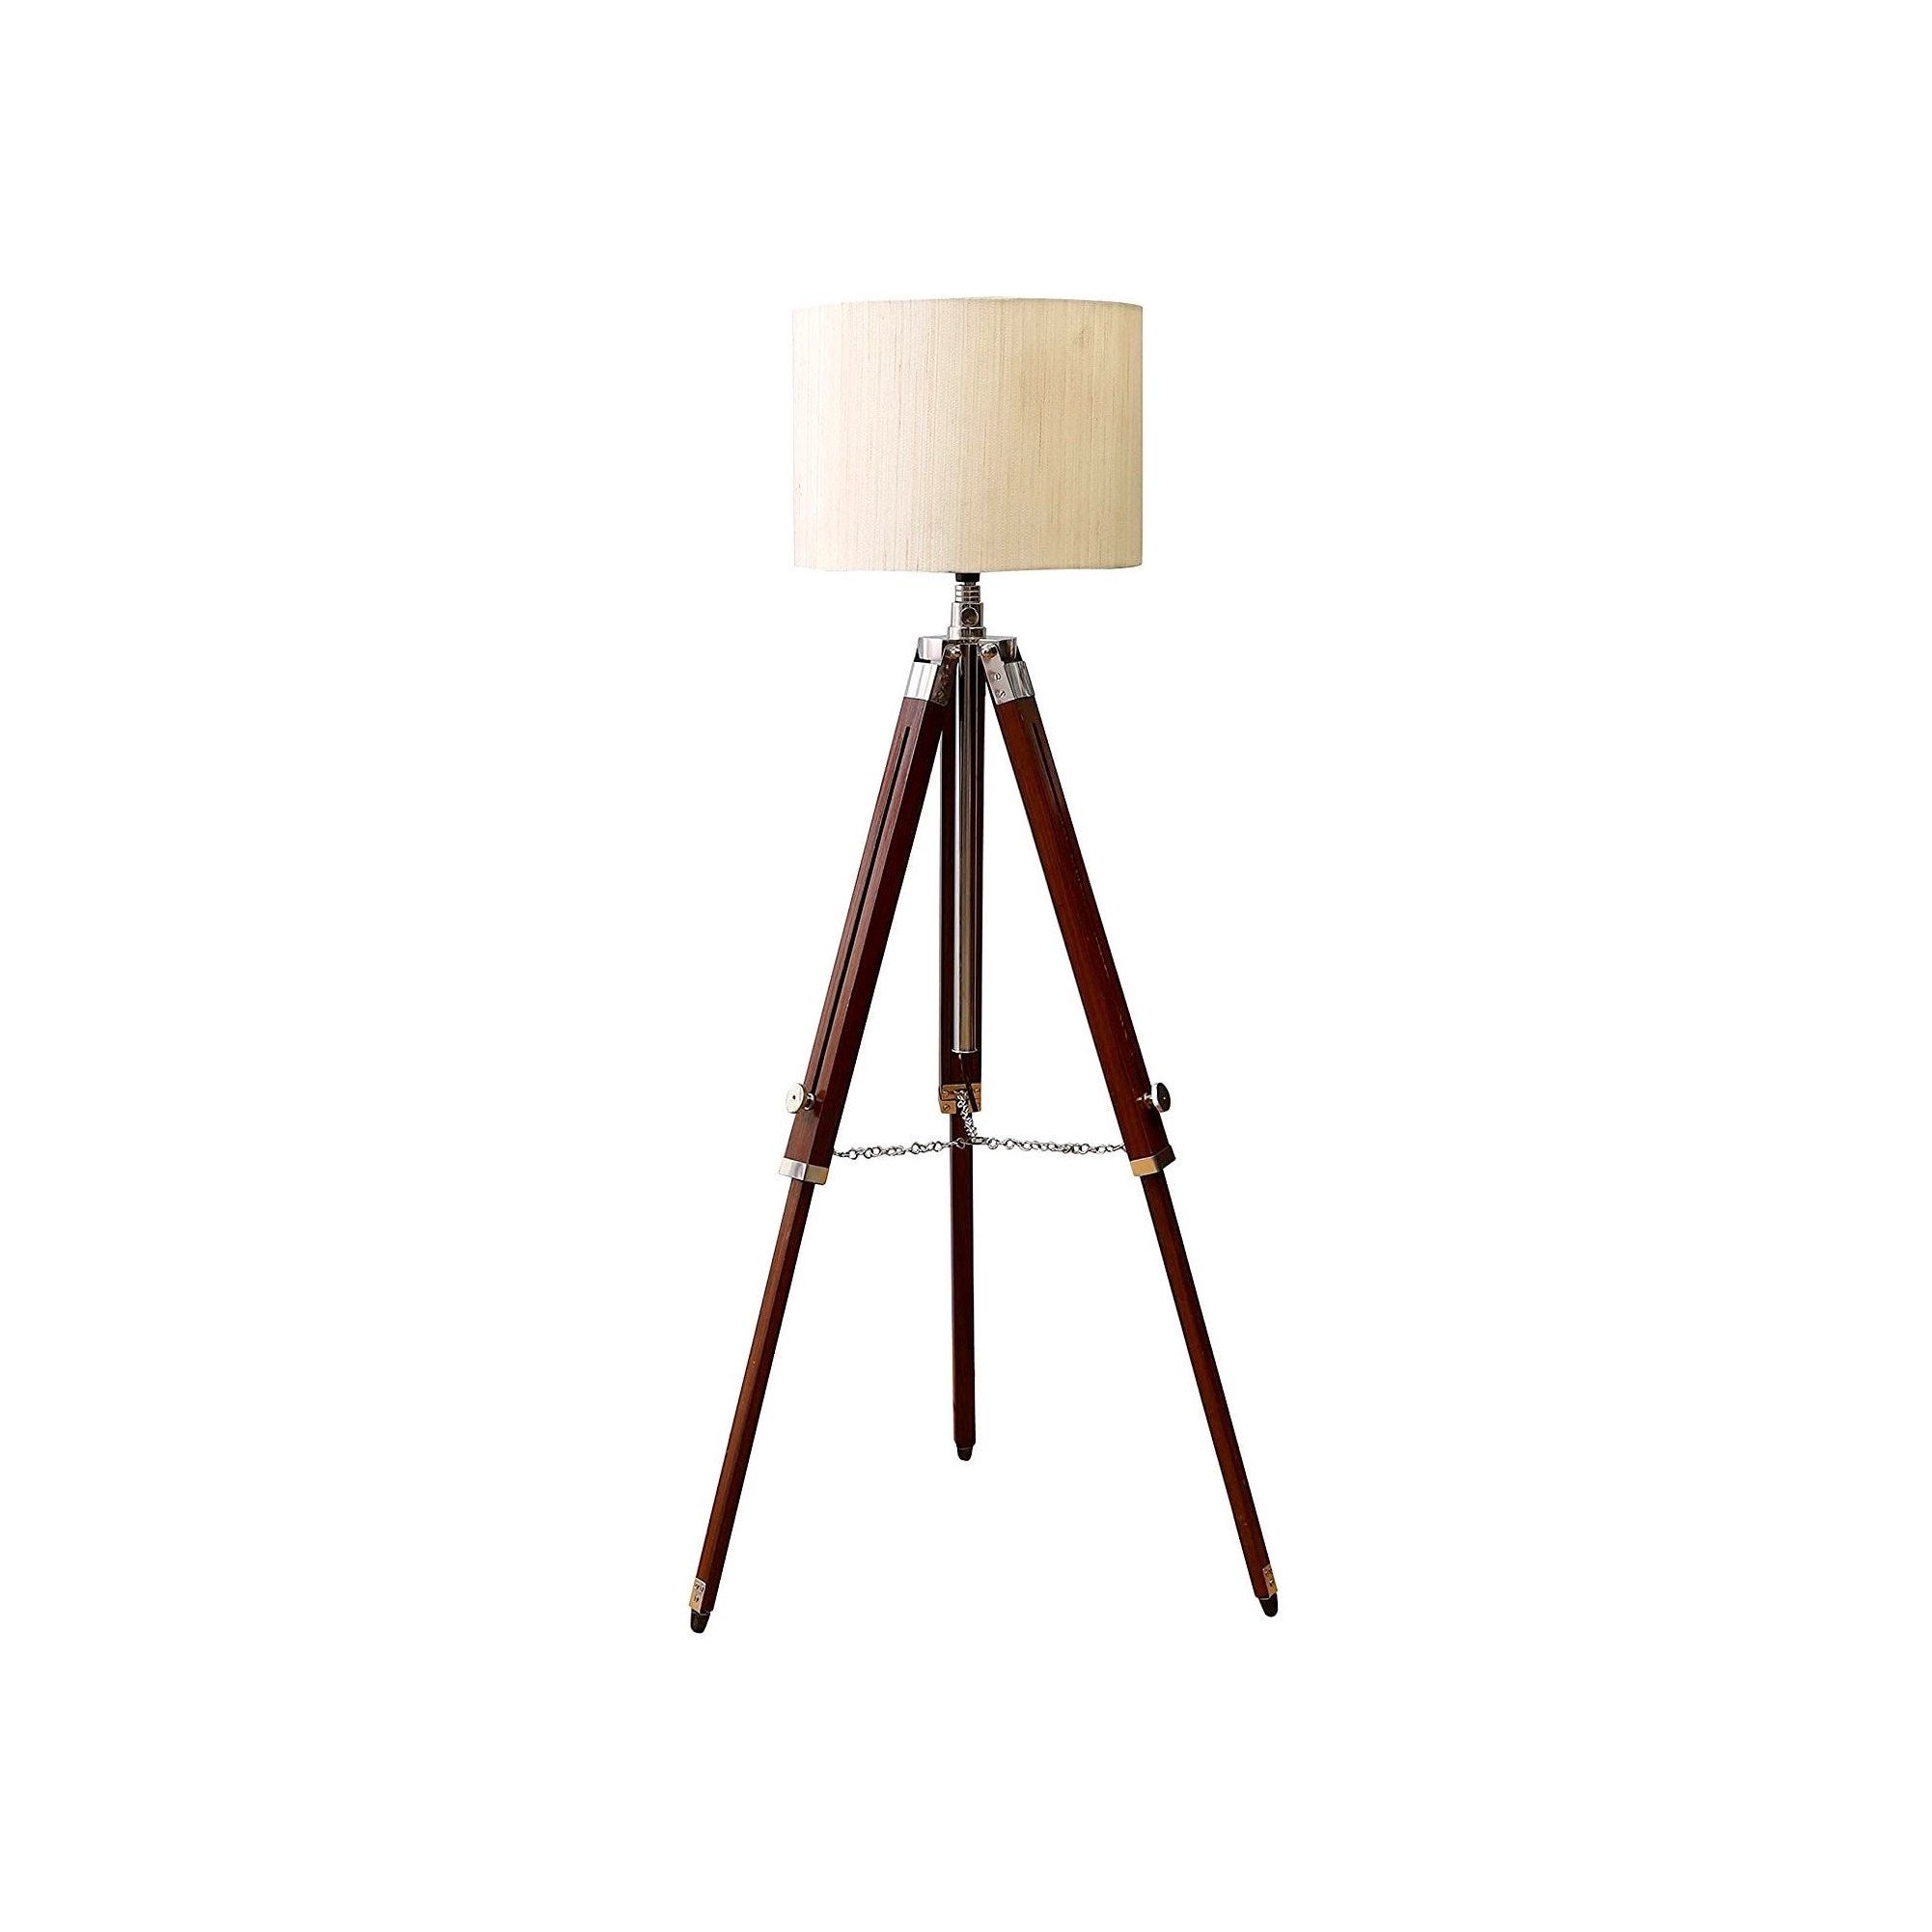 Wood Tripod Standing Lamps Intended For Most Current Tripod Floor Lamp – Etsy (View 7 of 10)